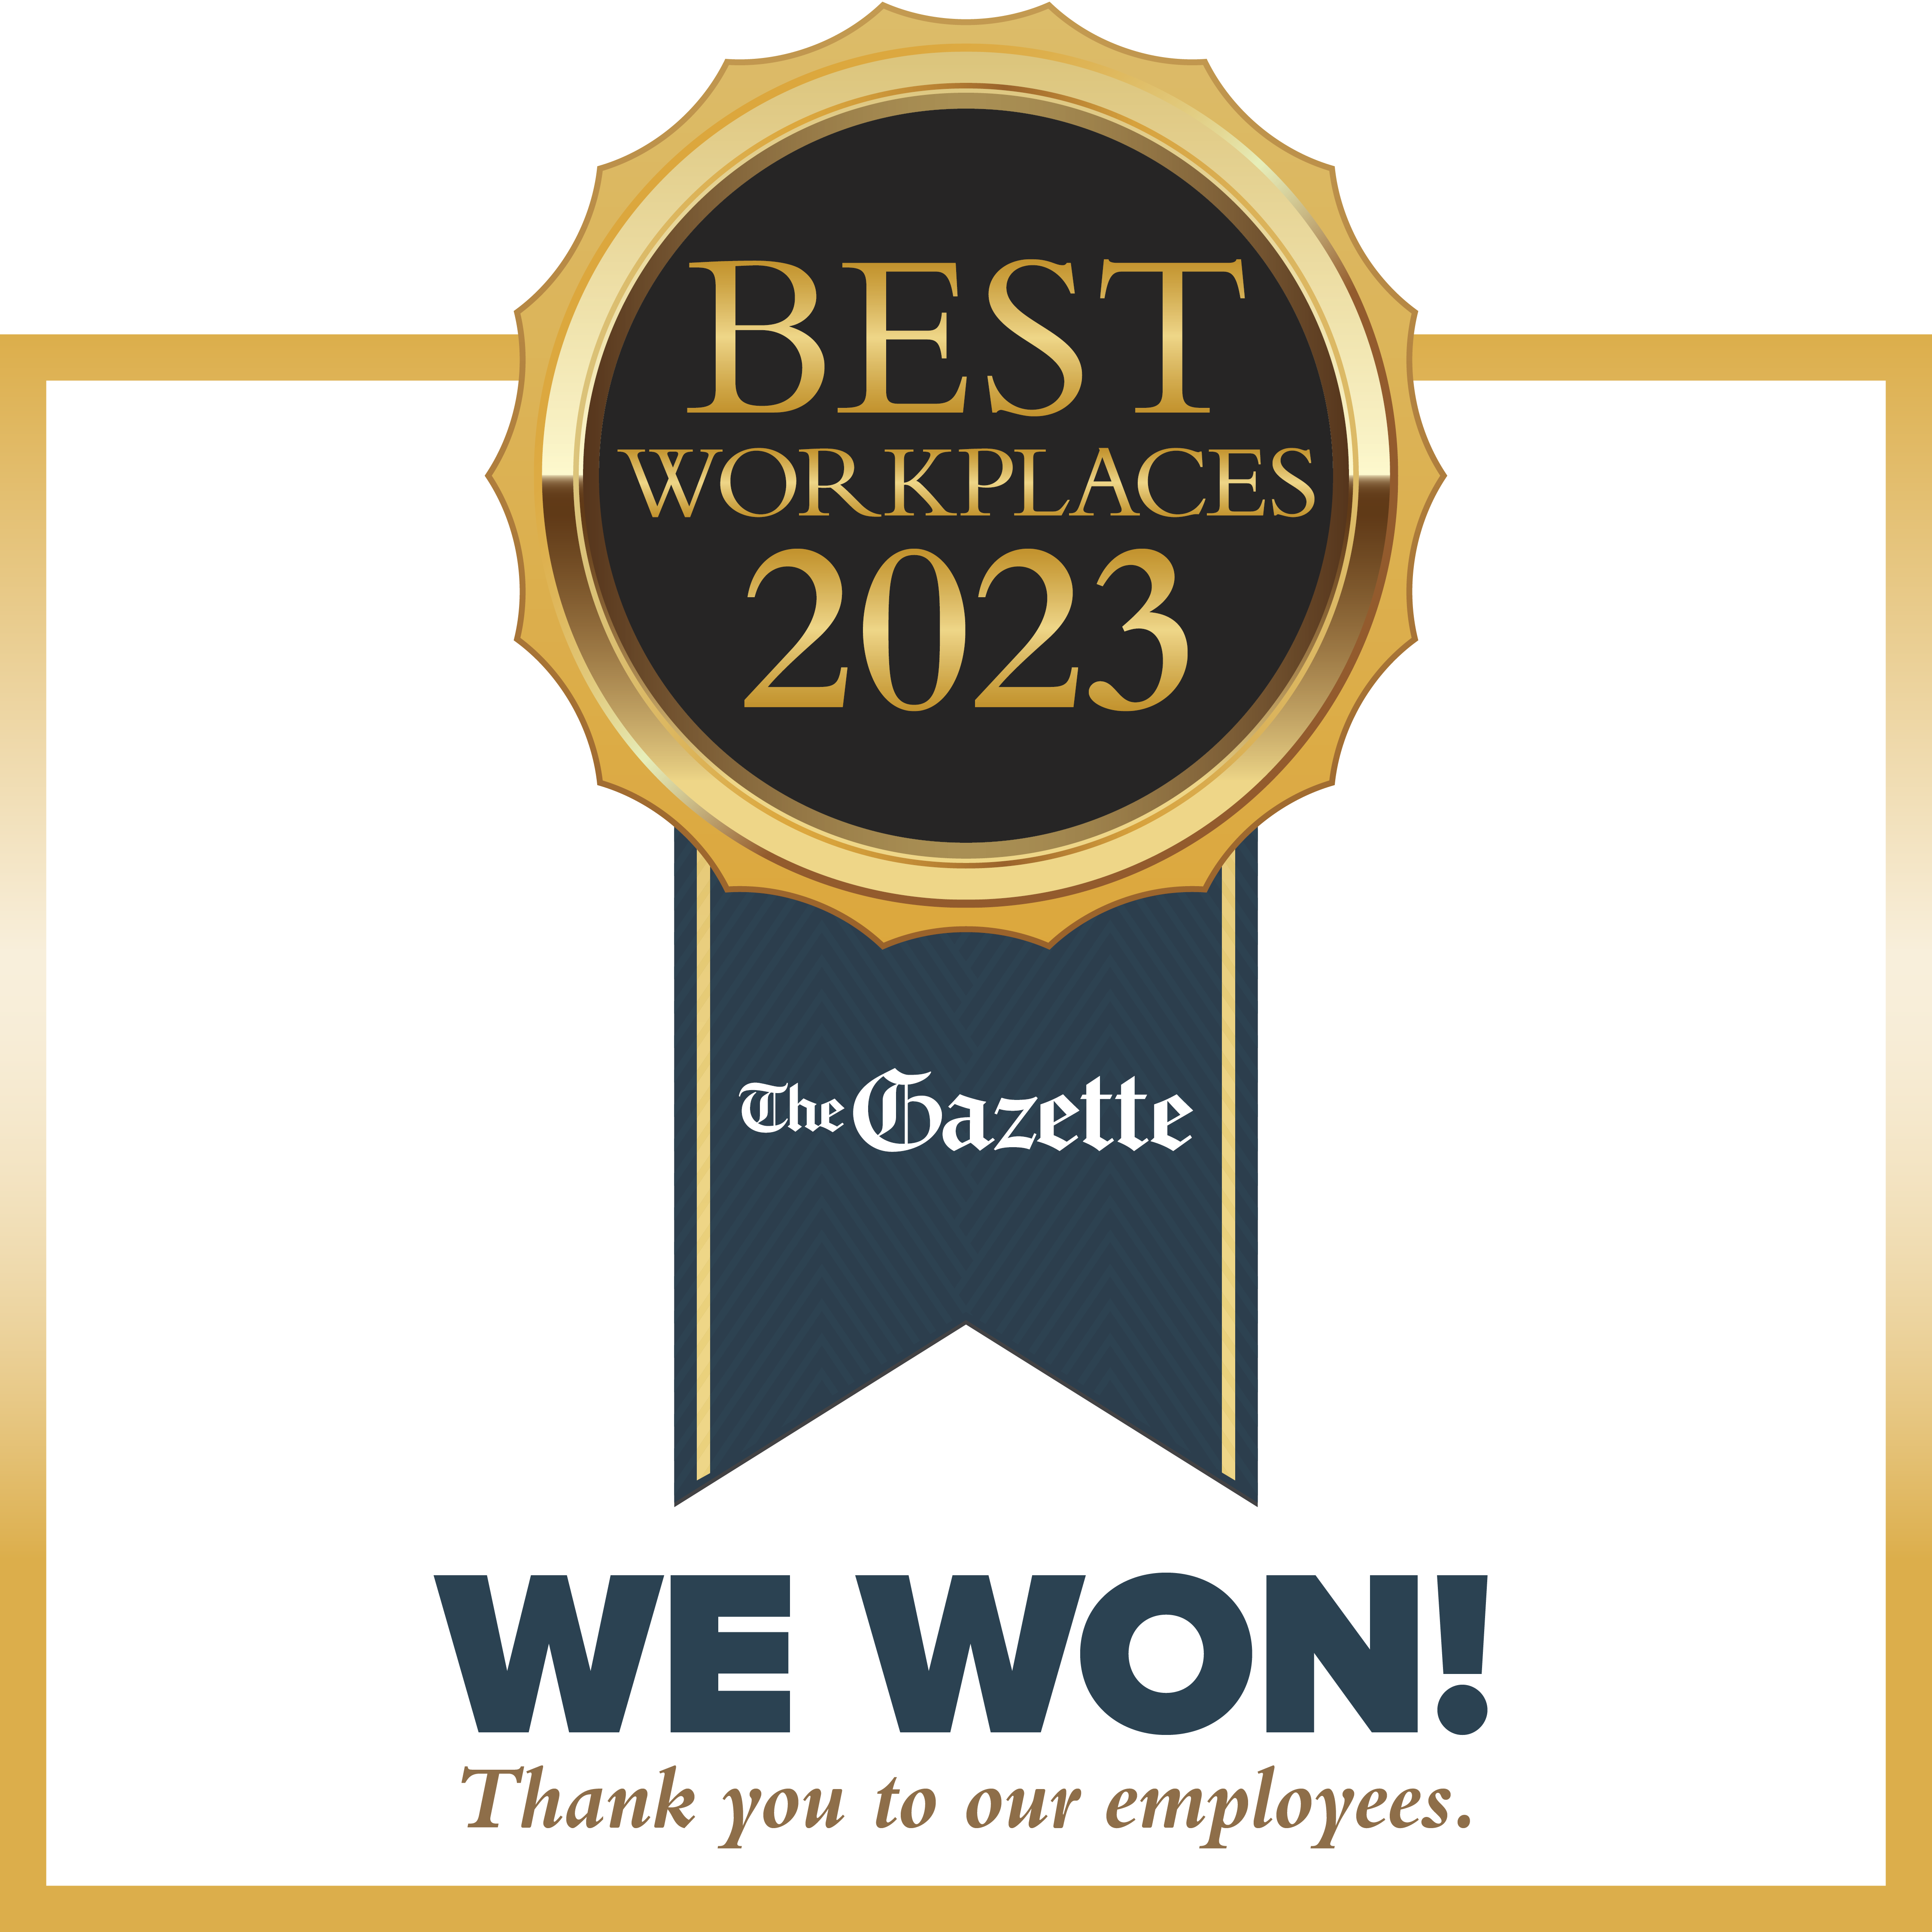 Best Workplaces 2023 ribbon and text, "we won!"